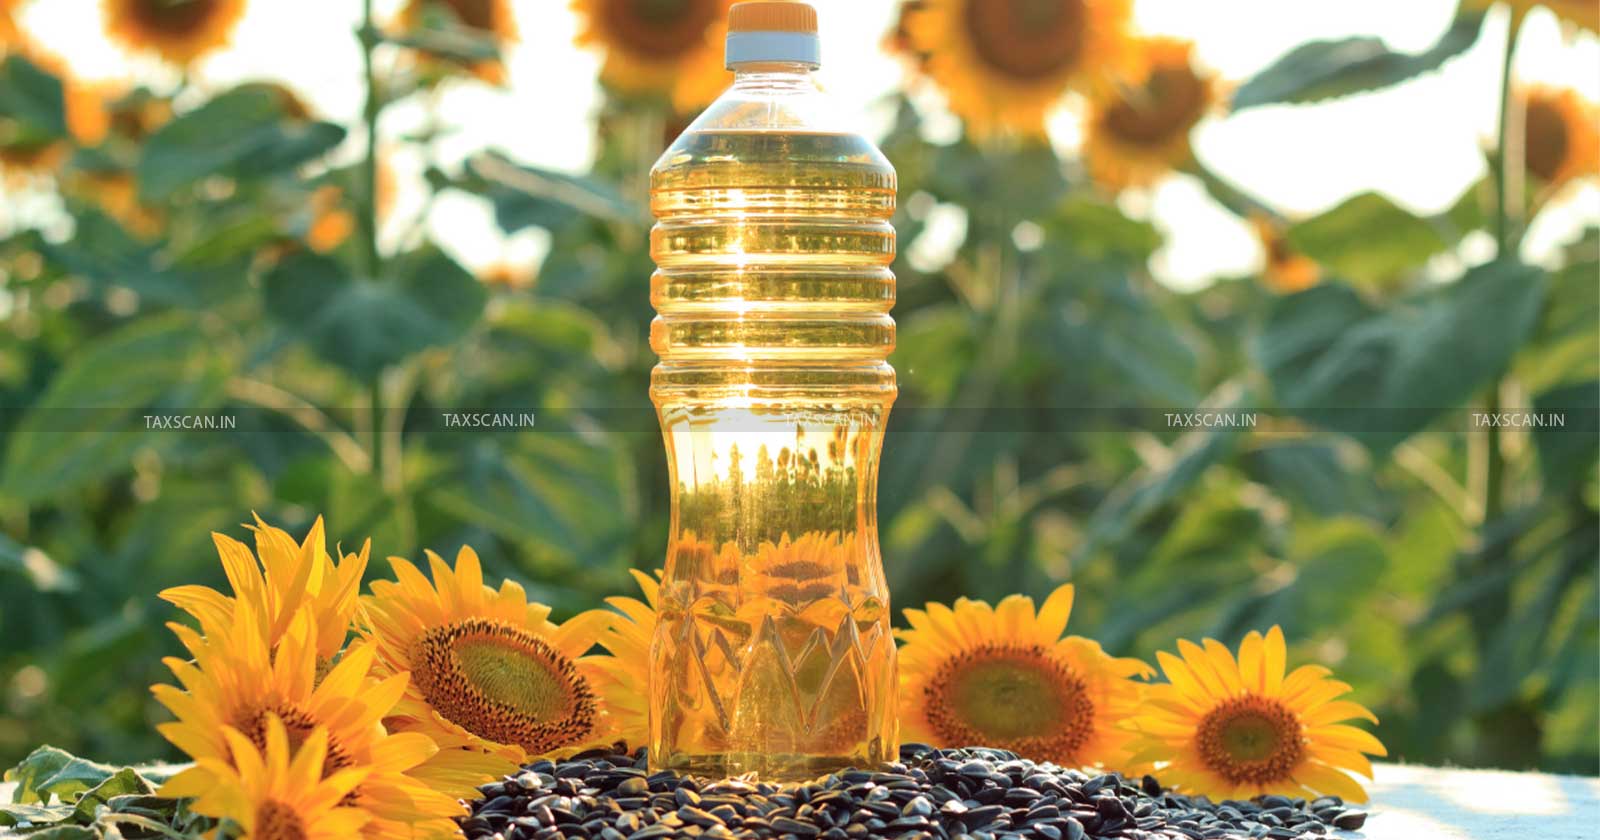 Export Import Update - Sunflower Oil Export Regulations - Sunflower Oil Export - Sunflower Oil Export Policy - TAXSCAN